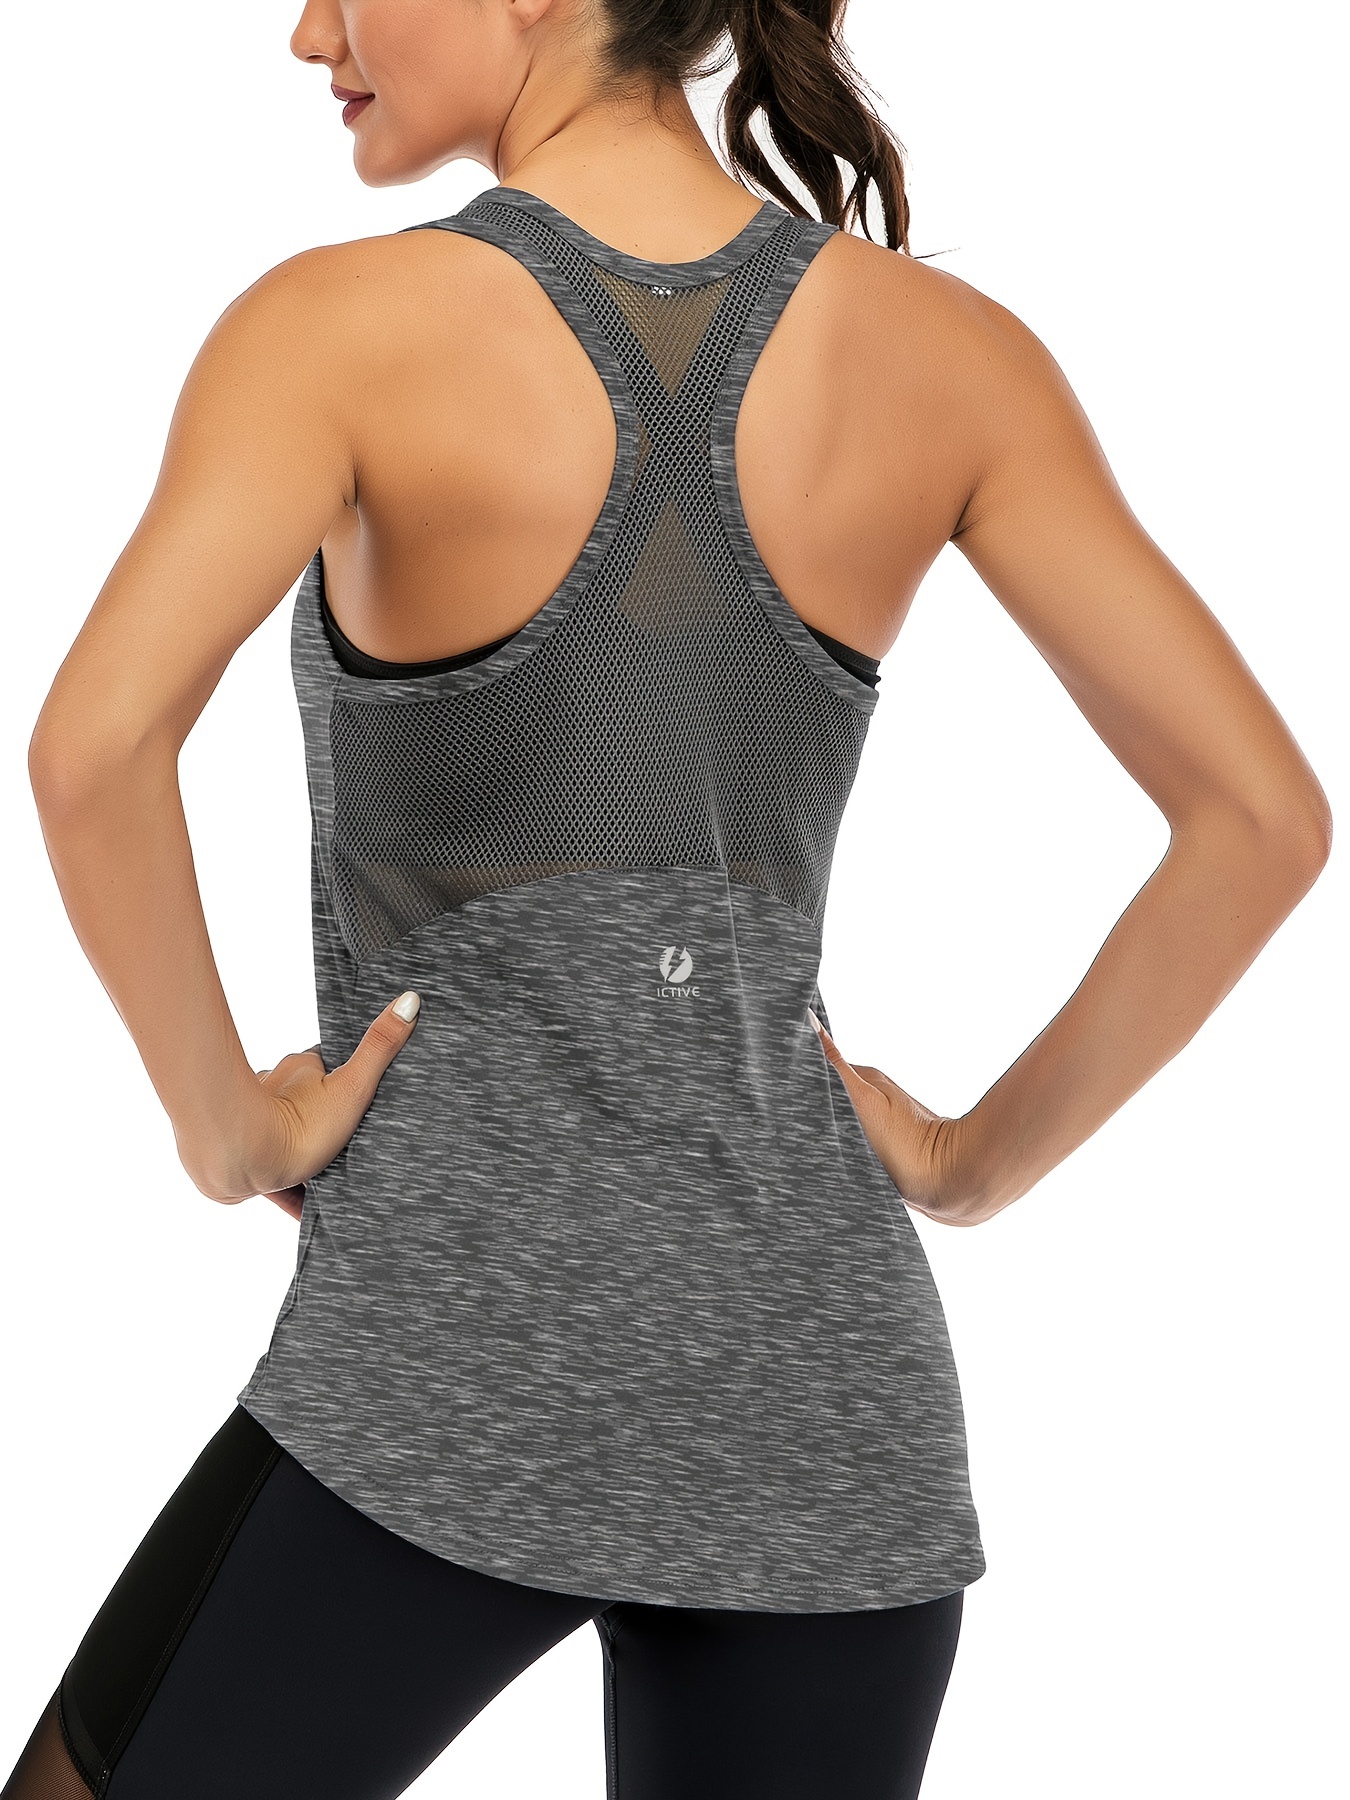  ICTIVE Women's Sleeveless Yoga Workout Tank Top - Mesh Racerback,  Muscle, Gym, Activewear - Apricot S : Clothing, Shoes & Jewelry